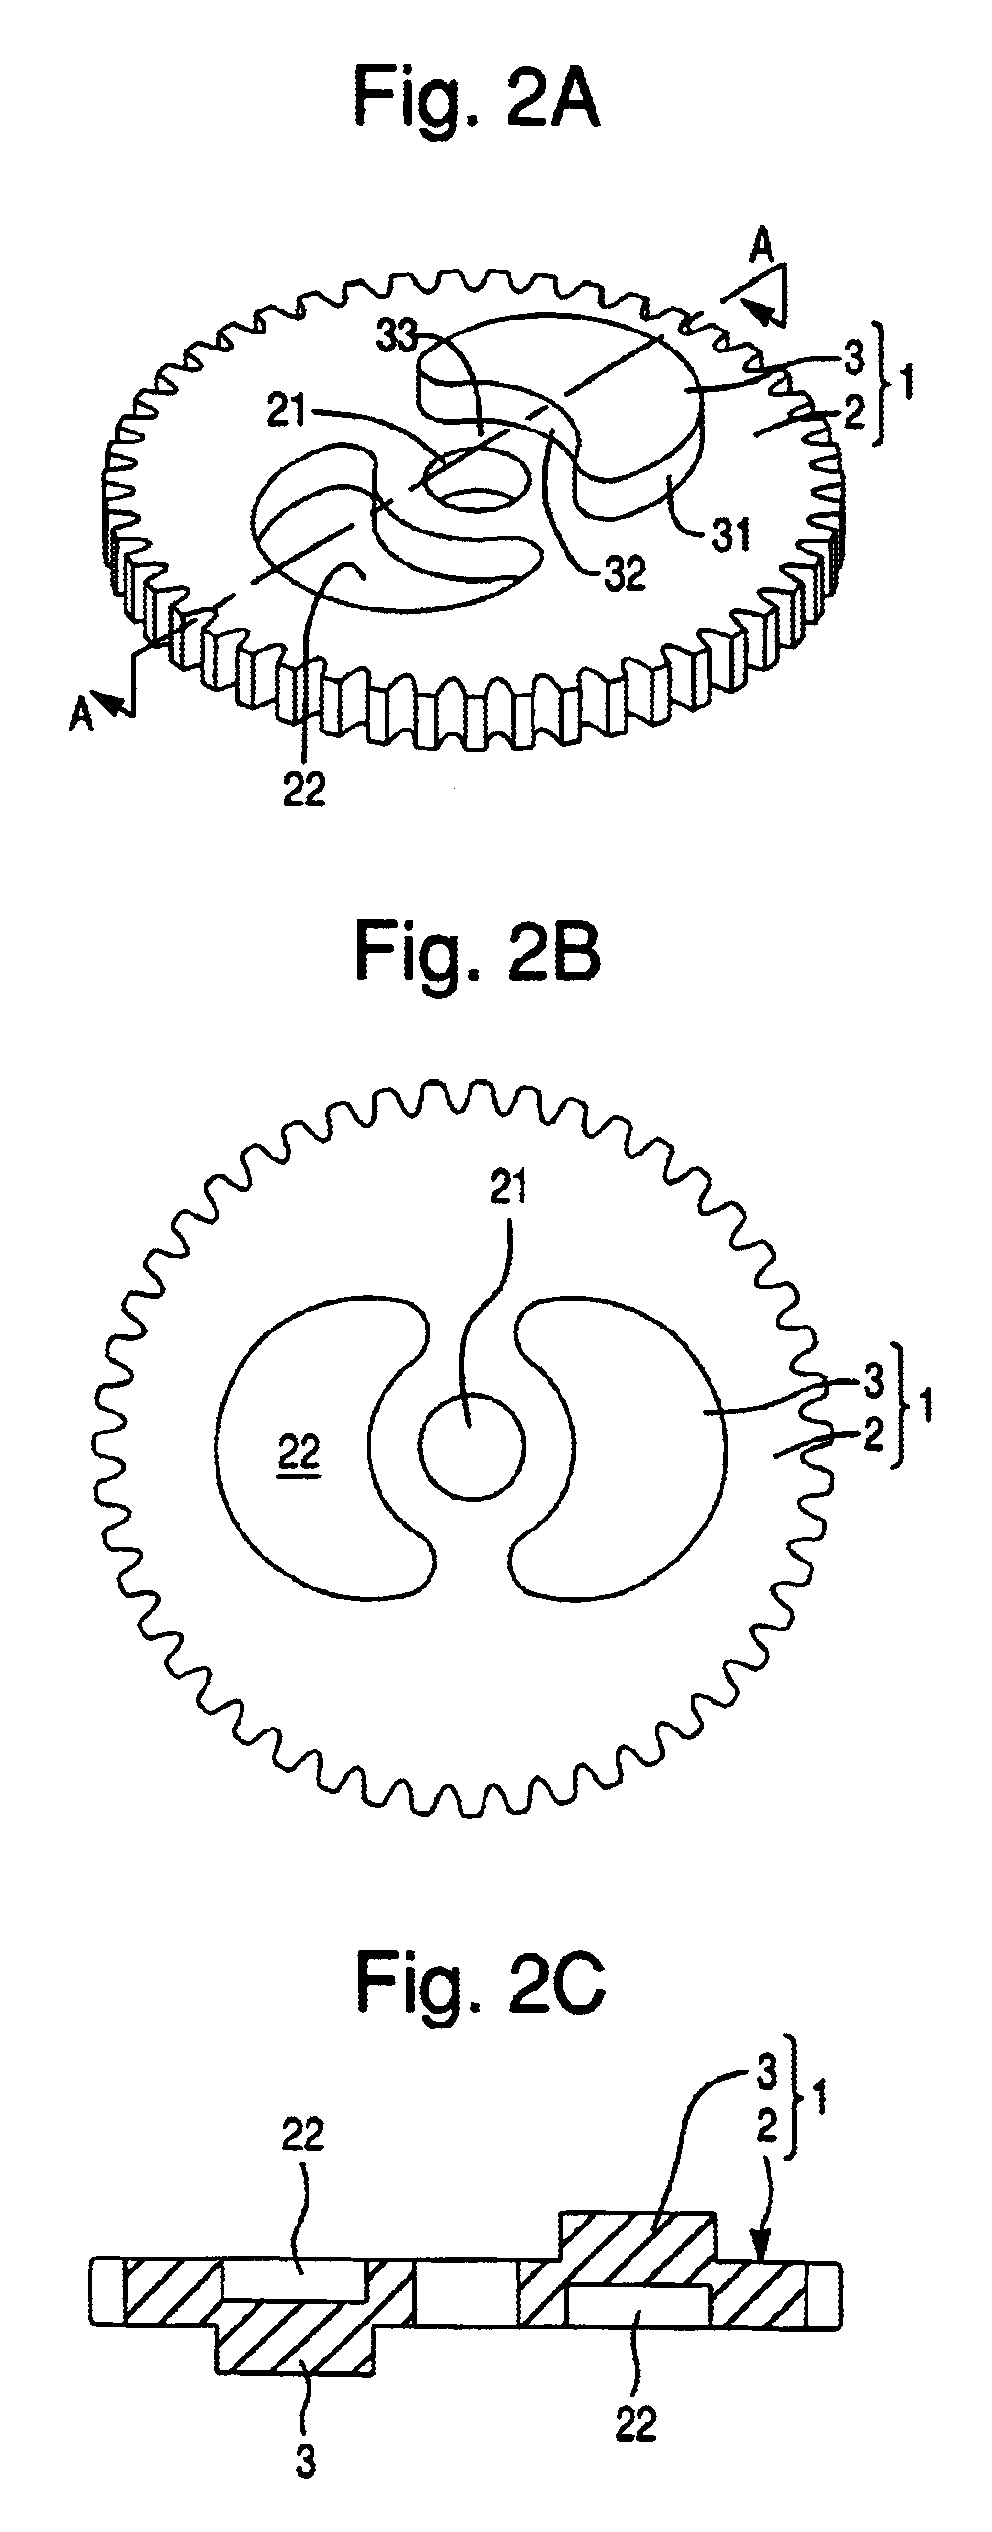 Cam mechanism for translation of circular motion into reciprocal motion